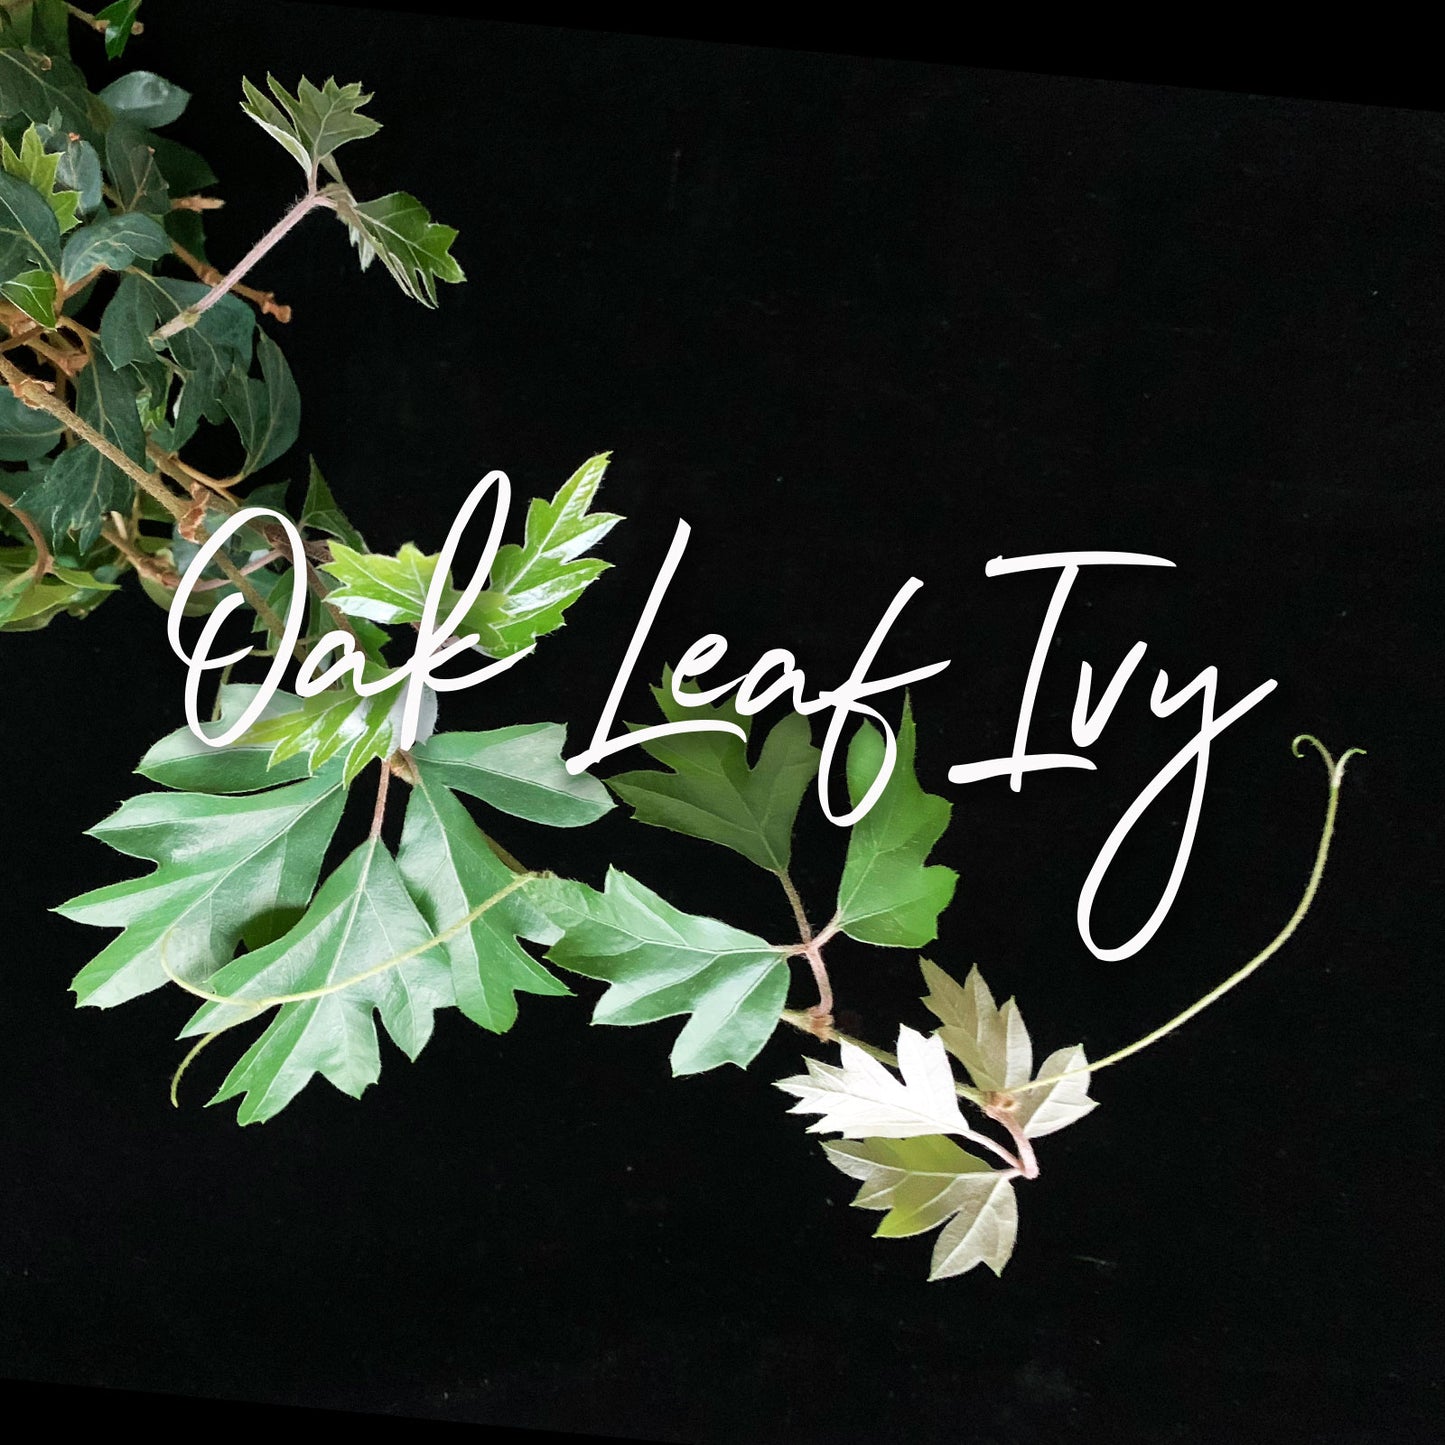 An image of Oak Leaf Ivy with its distinct leaves displayed against a dark background, accompanied by elegant white text labeling the plant. Order online for plants & flowers from the best florist in Toronto near you.